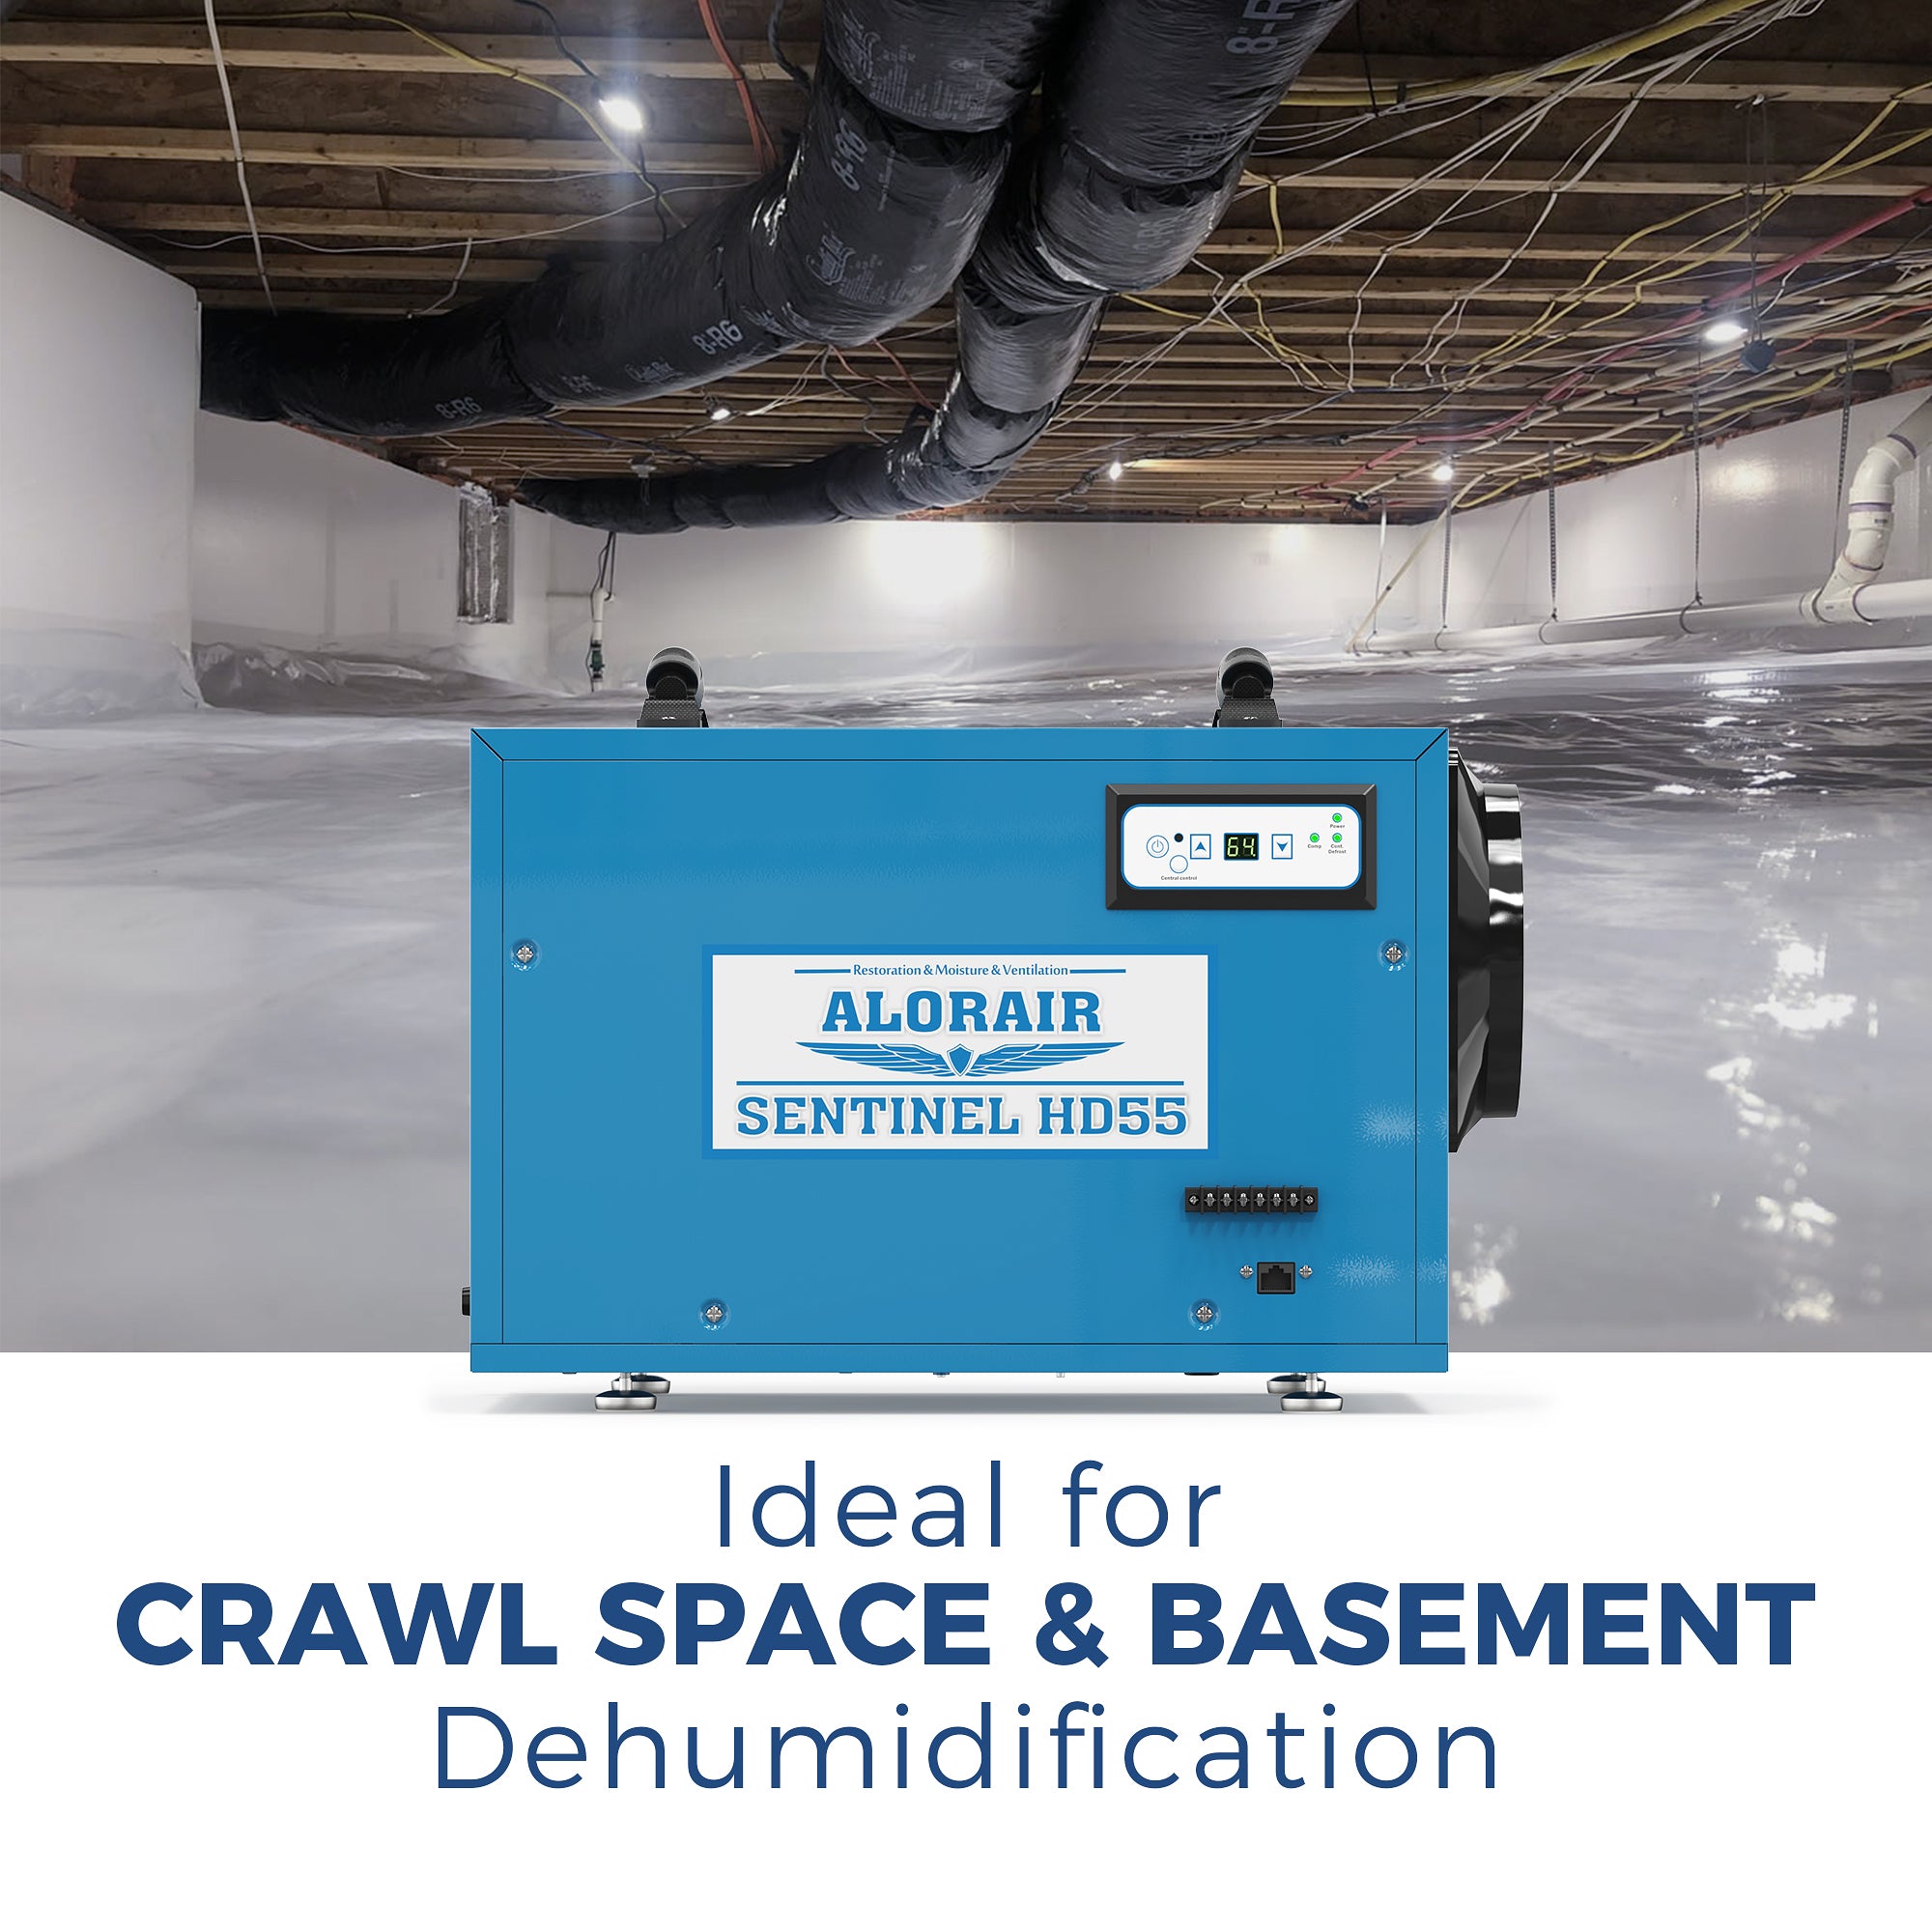 ALORAIR Commercial Dehumidifier 113 Pint, with Drain Hose for Crawl Spaces | Sentinel HD55 (Blue)